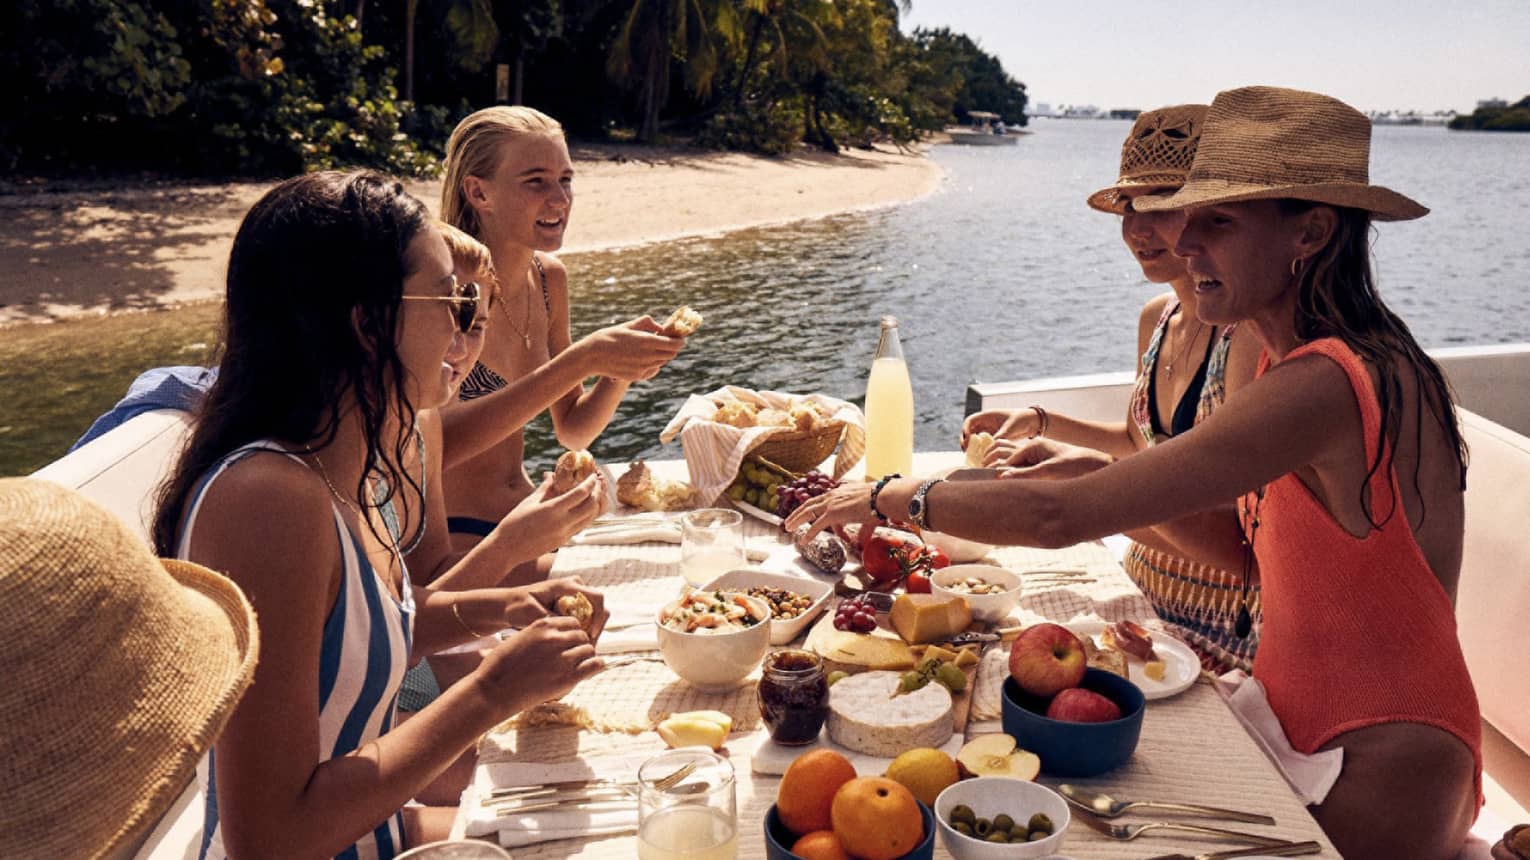 A group of women eating on a boat.